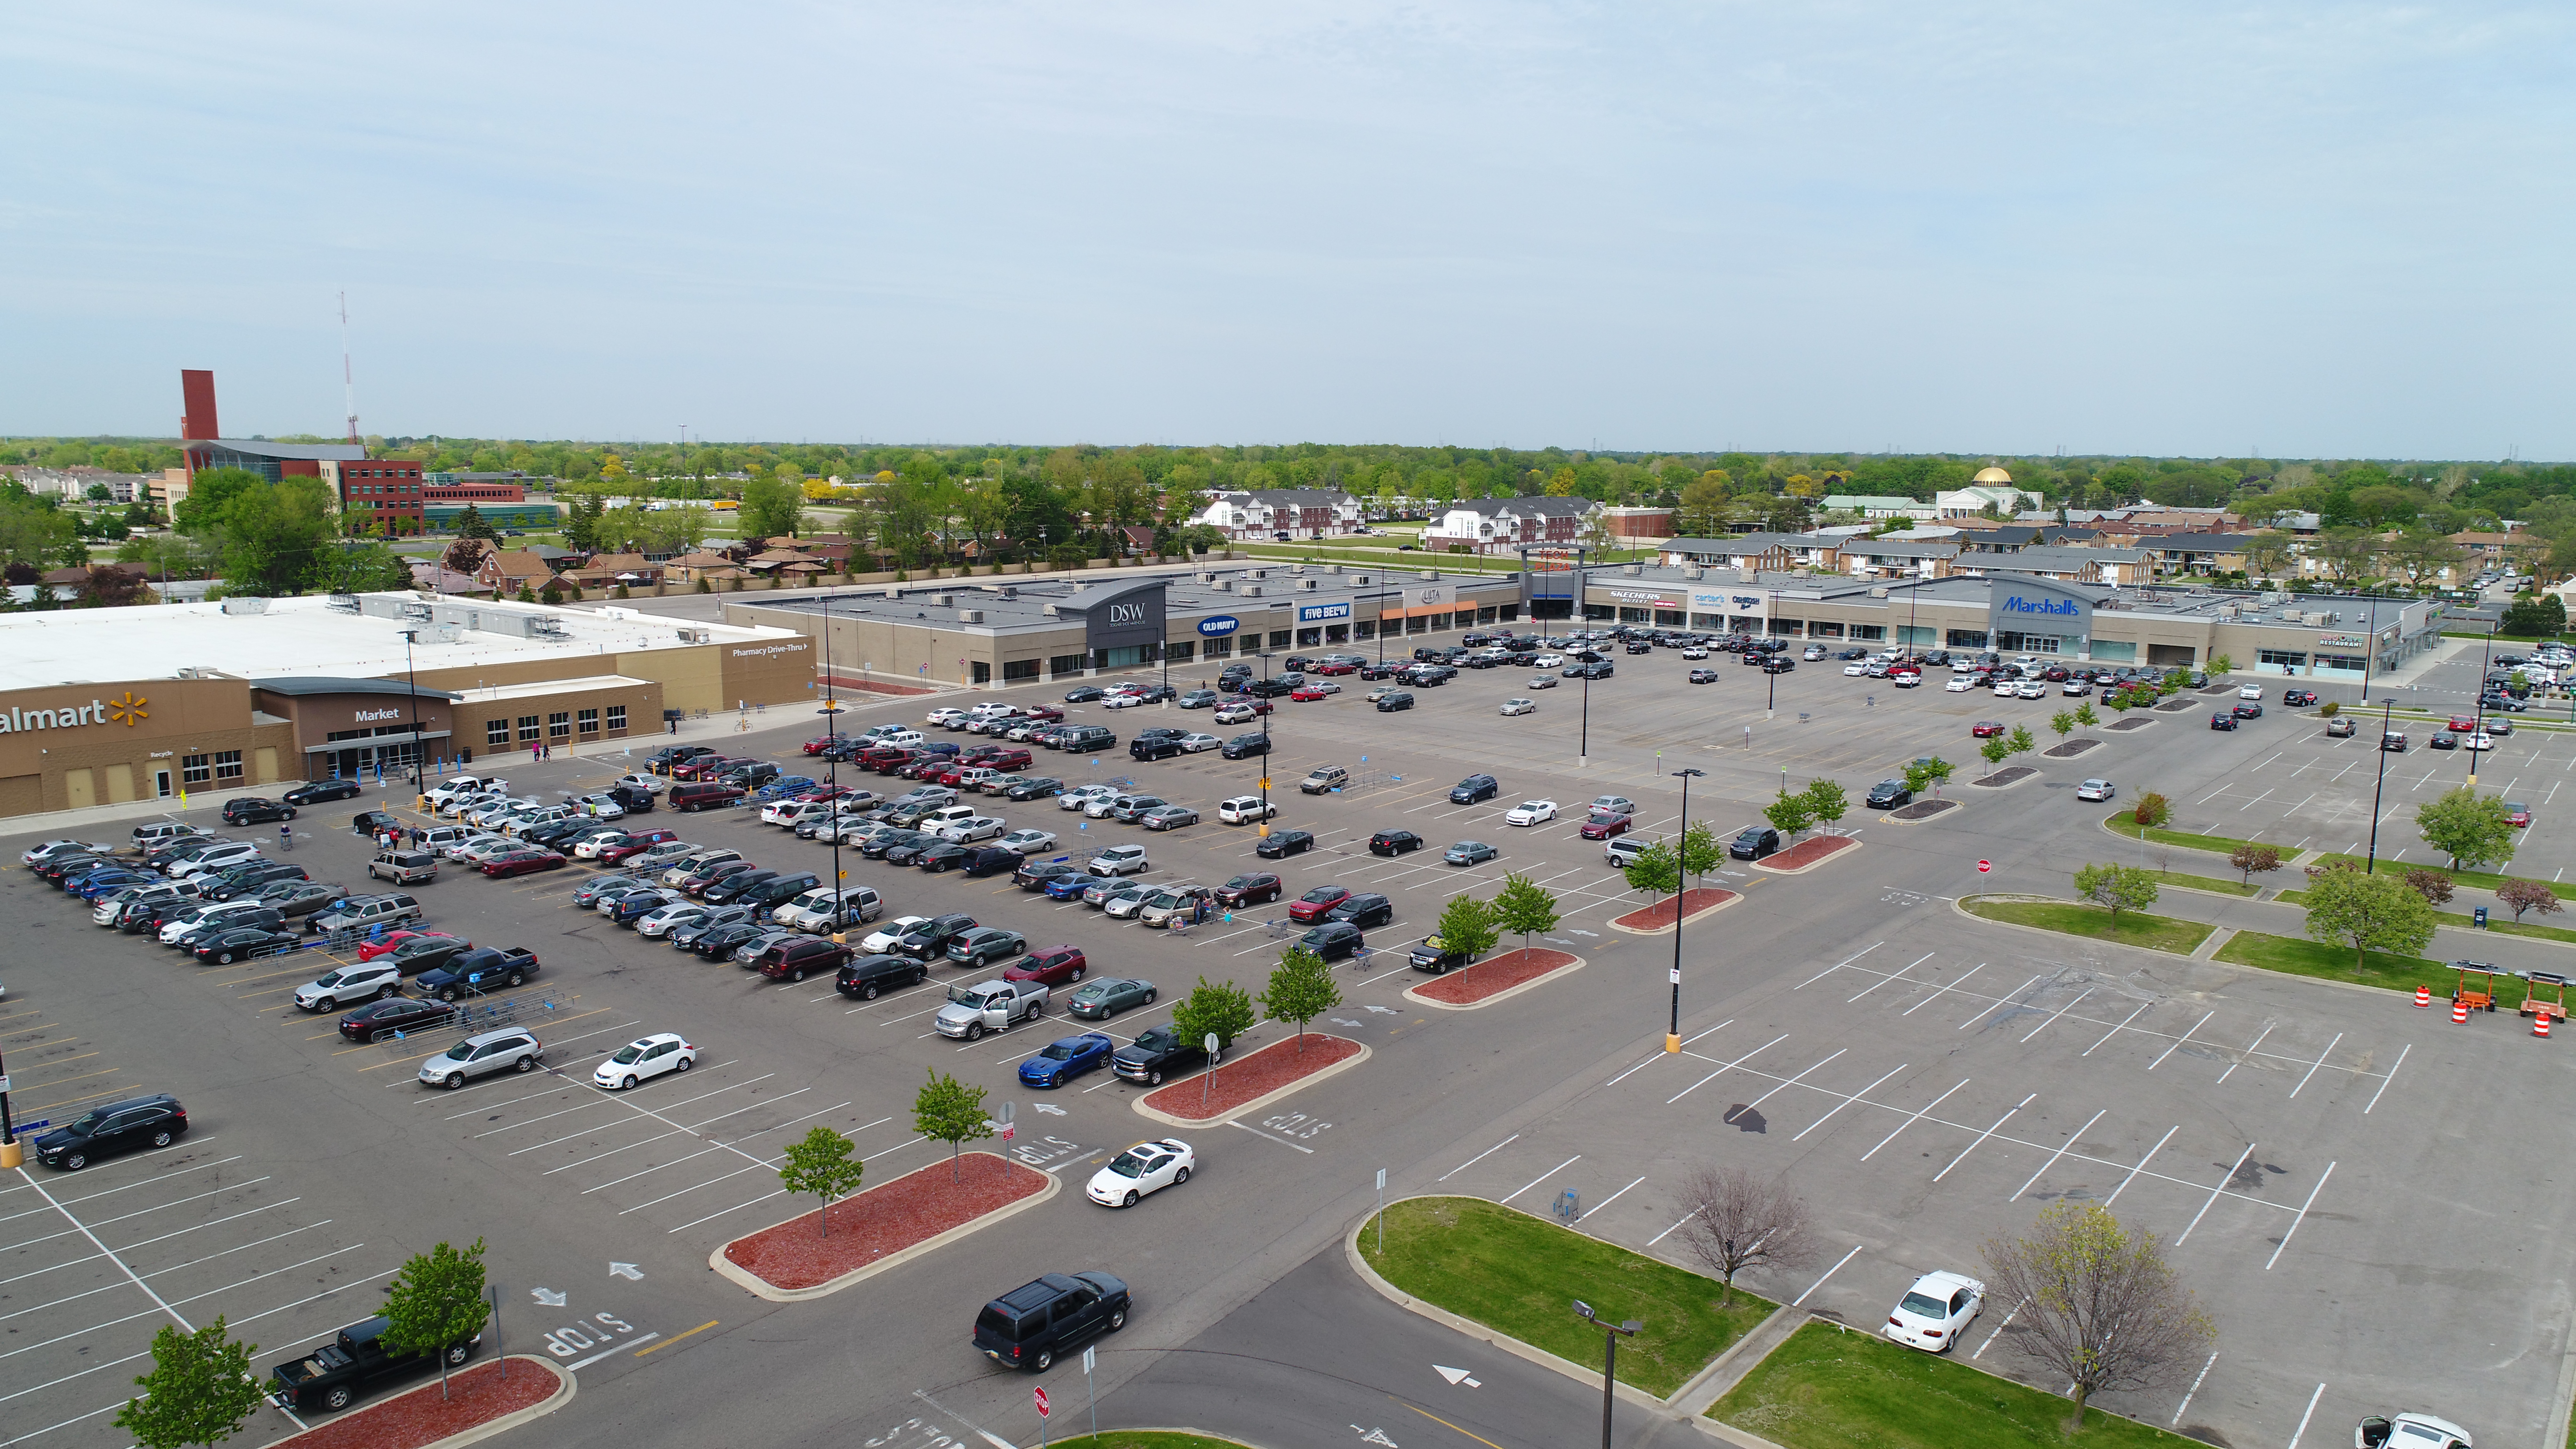 8301-8399 12 Mile Rd, Warren, Michigan 48093, ,Retail,For Lease,8301-8399 12 Mile Rd,1094